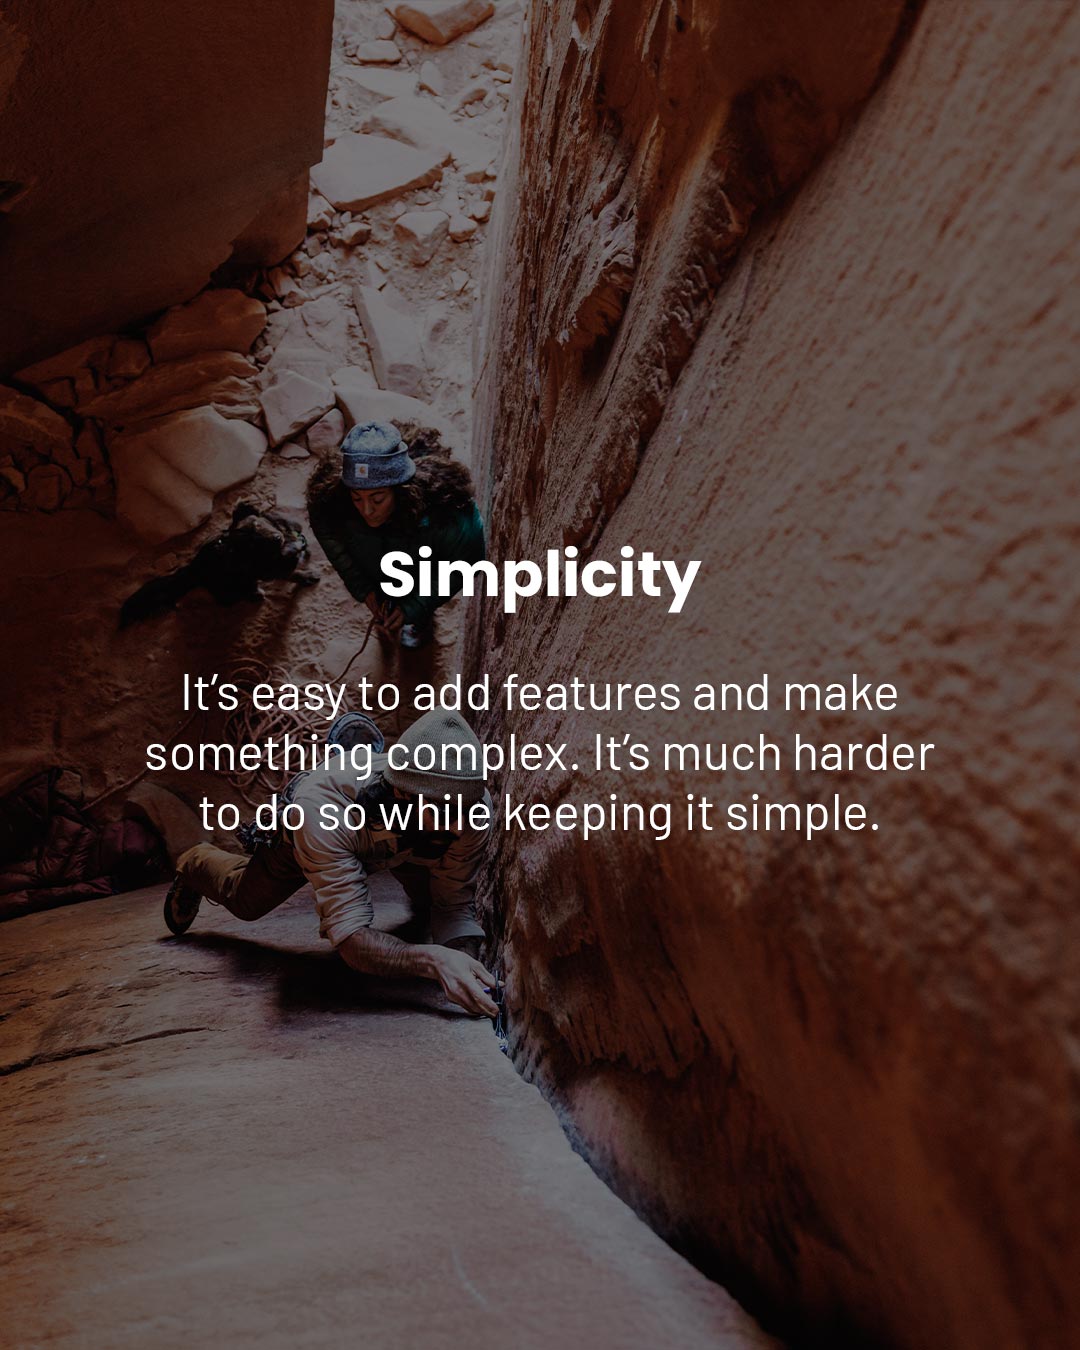 Simplicity - Saker principle with a man climbing in the back with dogs at the bottom